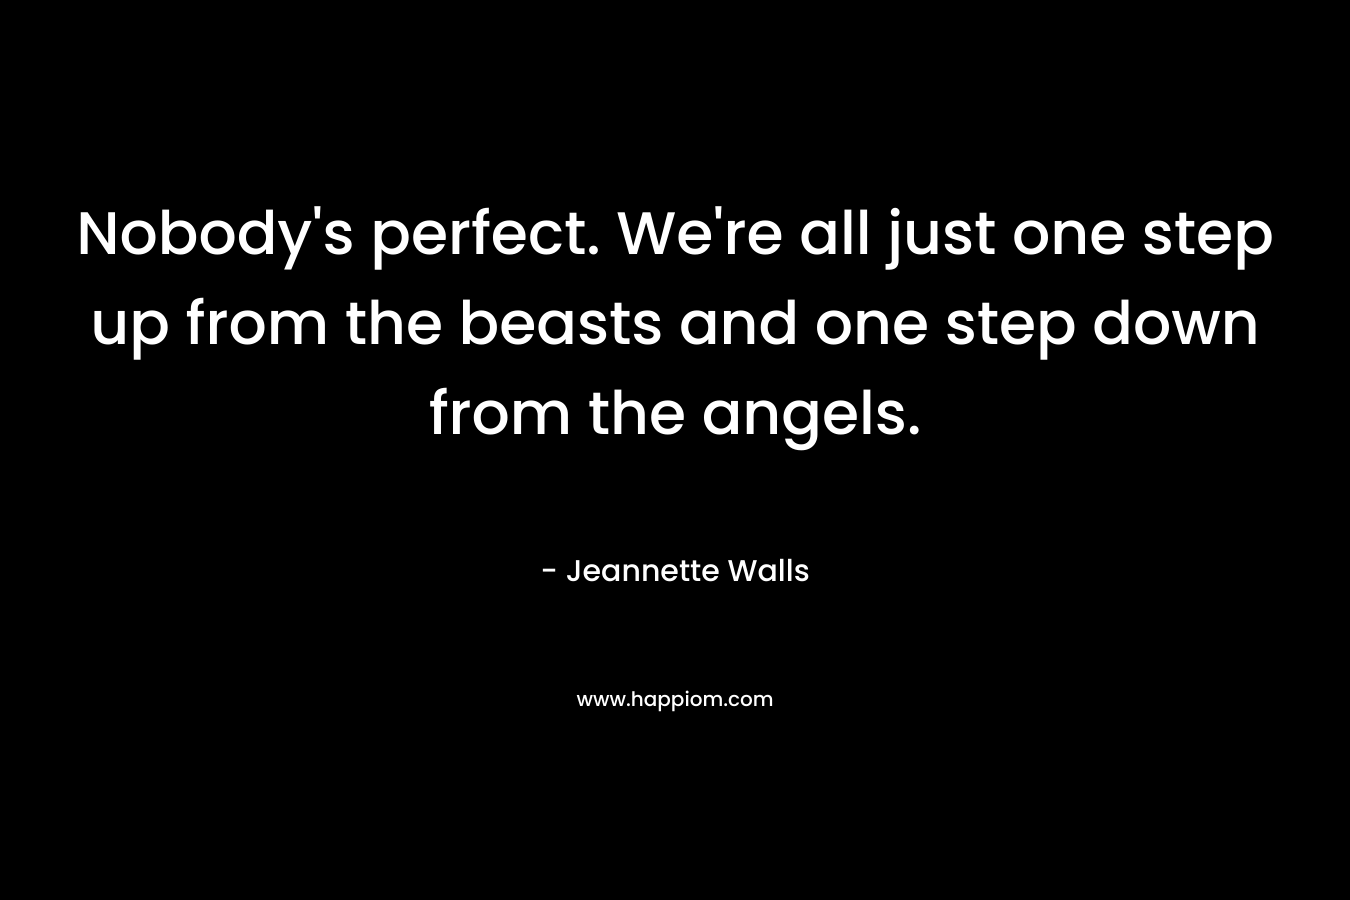 Nobody's perfect. We're all just one step up from the beasts and one step down from the angels.